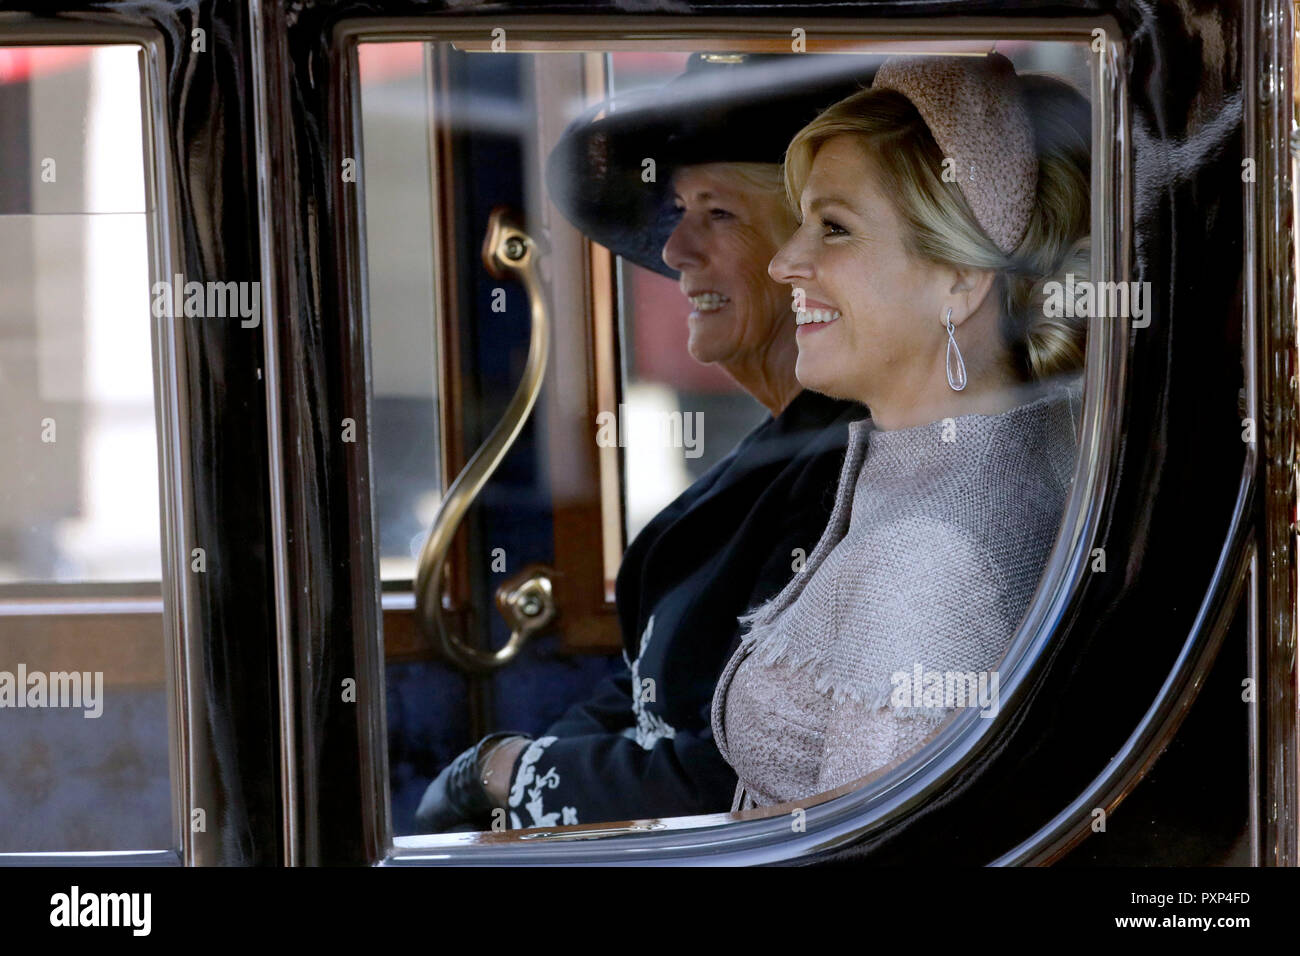 dutch-queen-maxima-and-the-camilla-the-duchess-of-cornwall-leave-in-a-horse-drawn-carriage-after-a-ceremonial-welcome-on-horse-guards-parade-in-london-for-dutch-king-willem-alexander-and-queen-maxima-state-visit-to-the-uk-PXP4FD.jpg